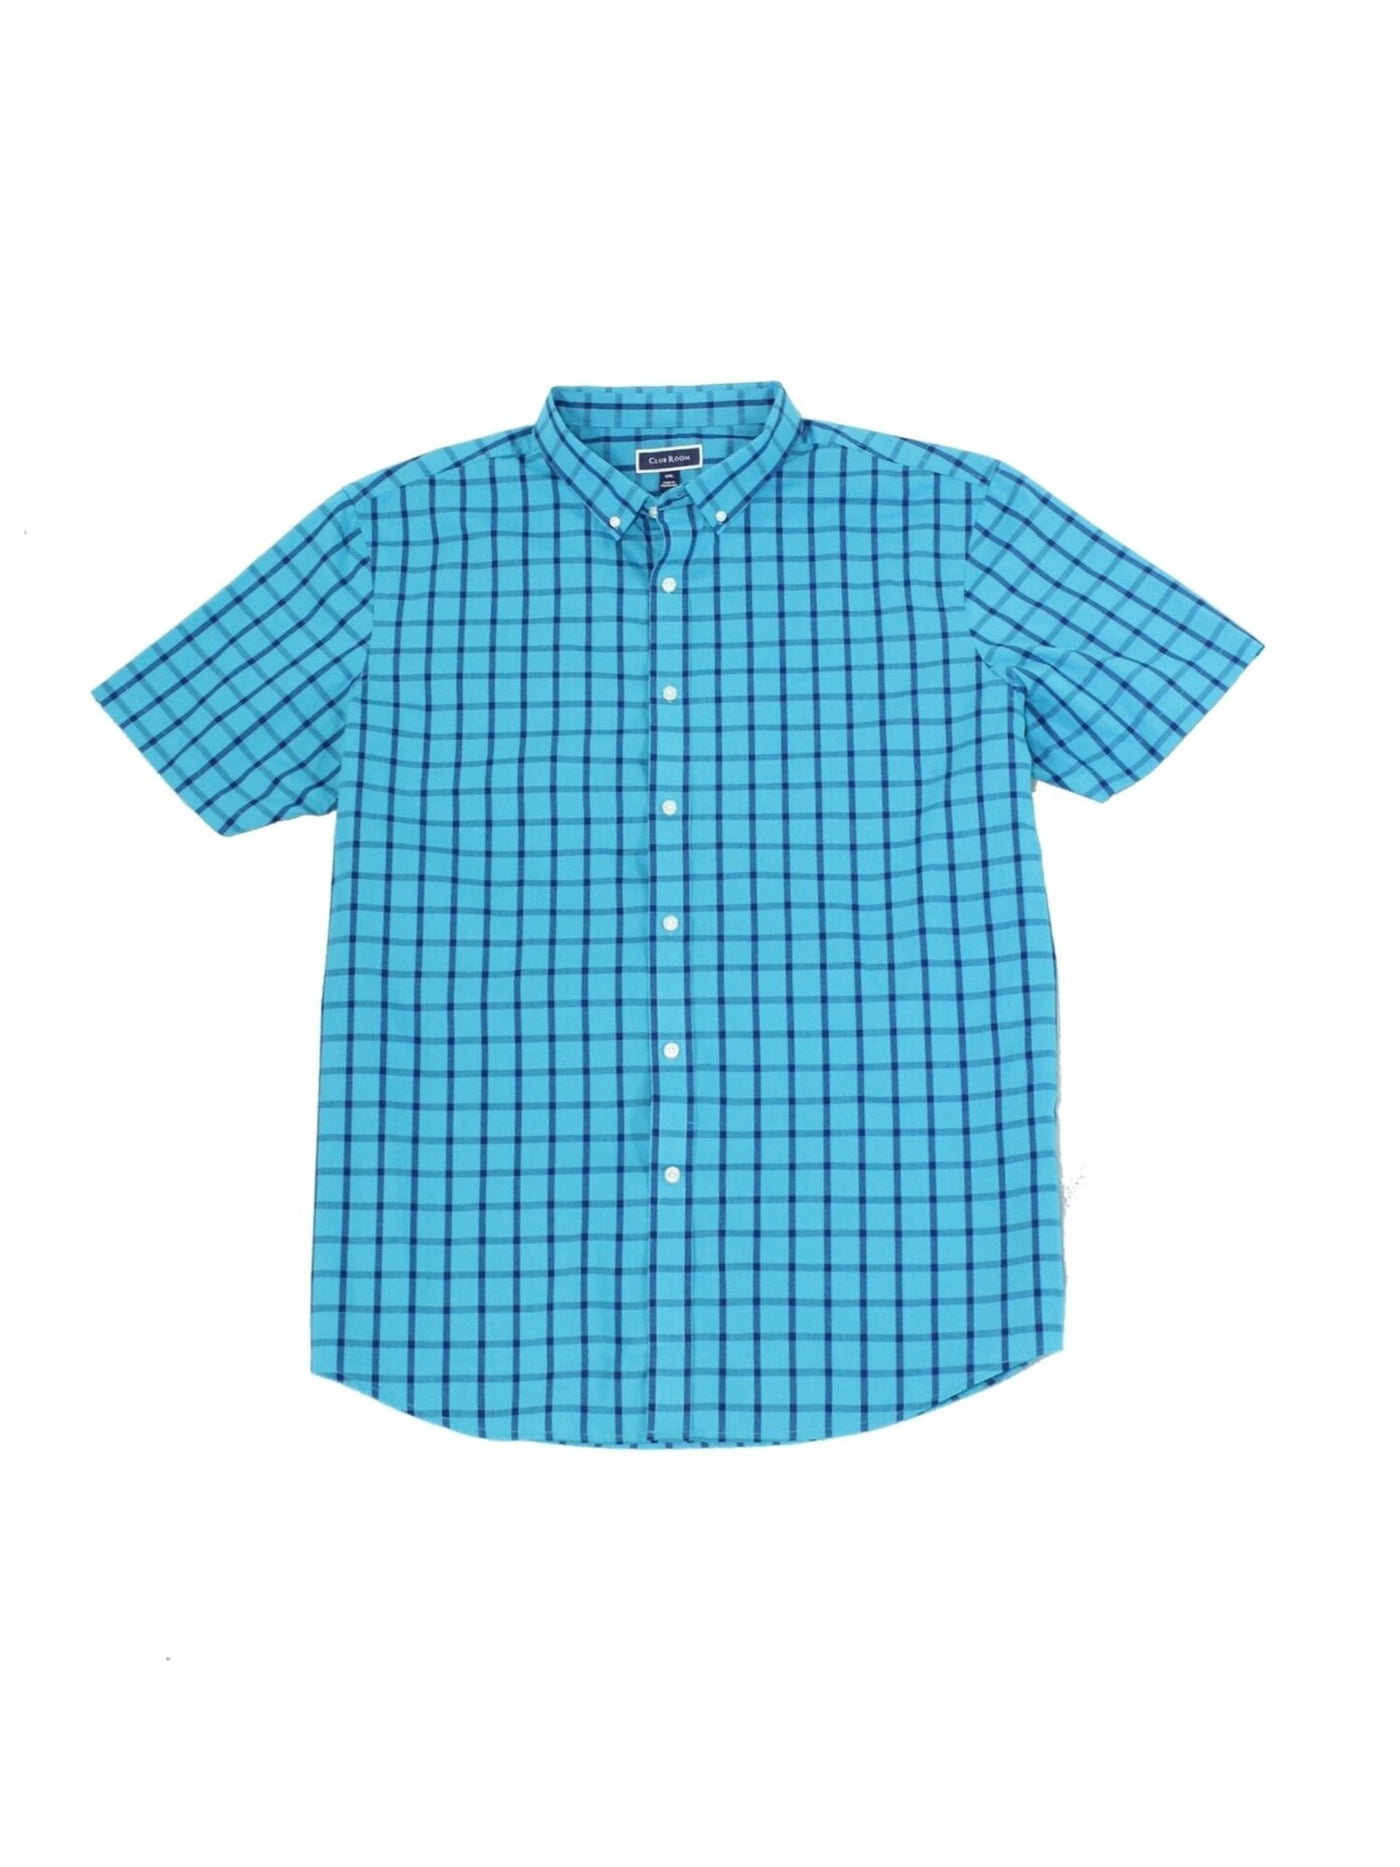 CLUBROOM Mens Turquoise Check Collared Dress Shirt S